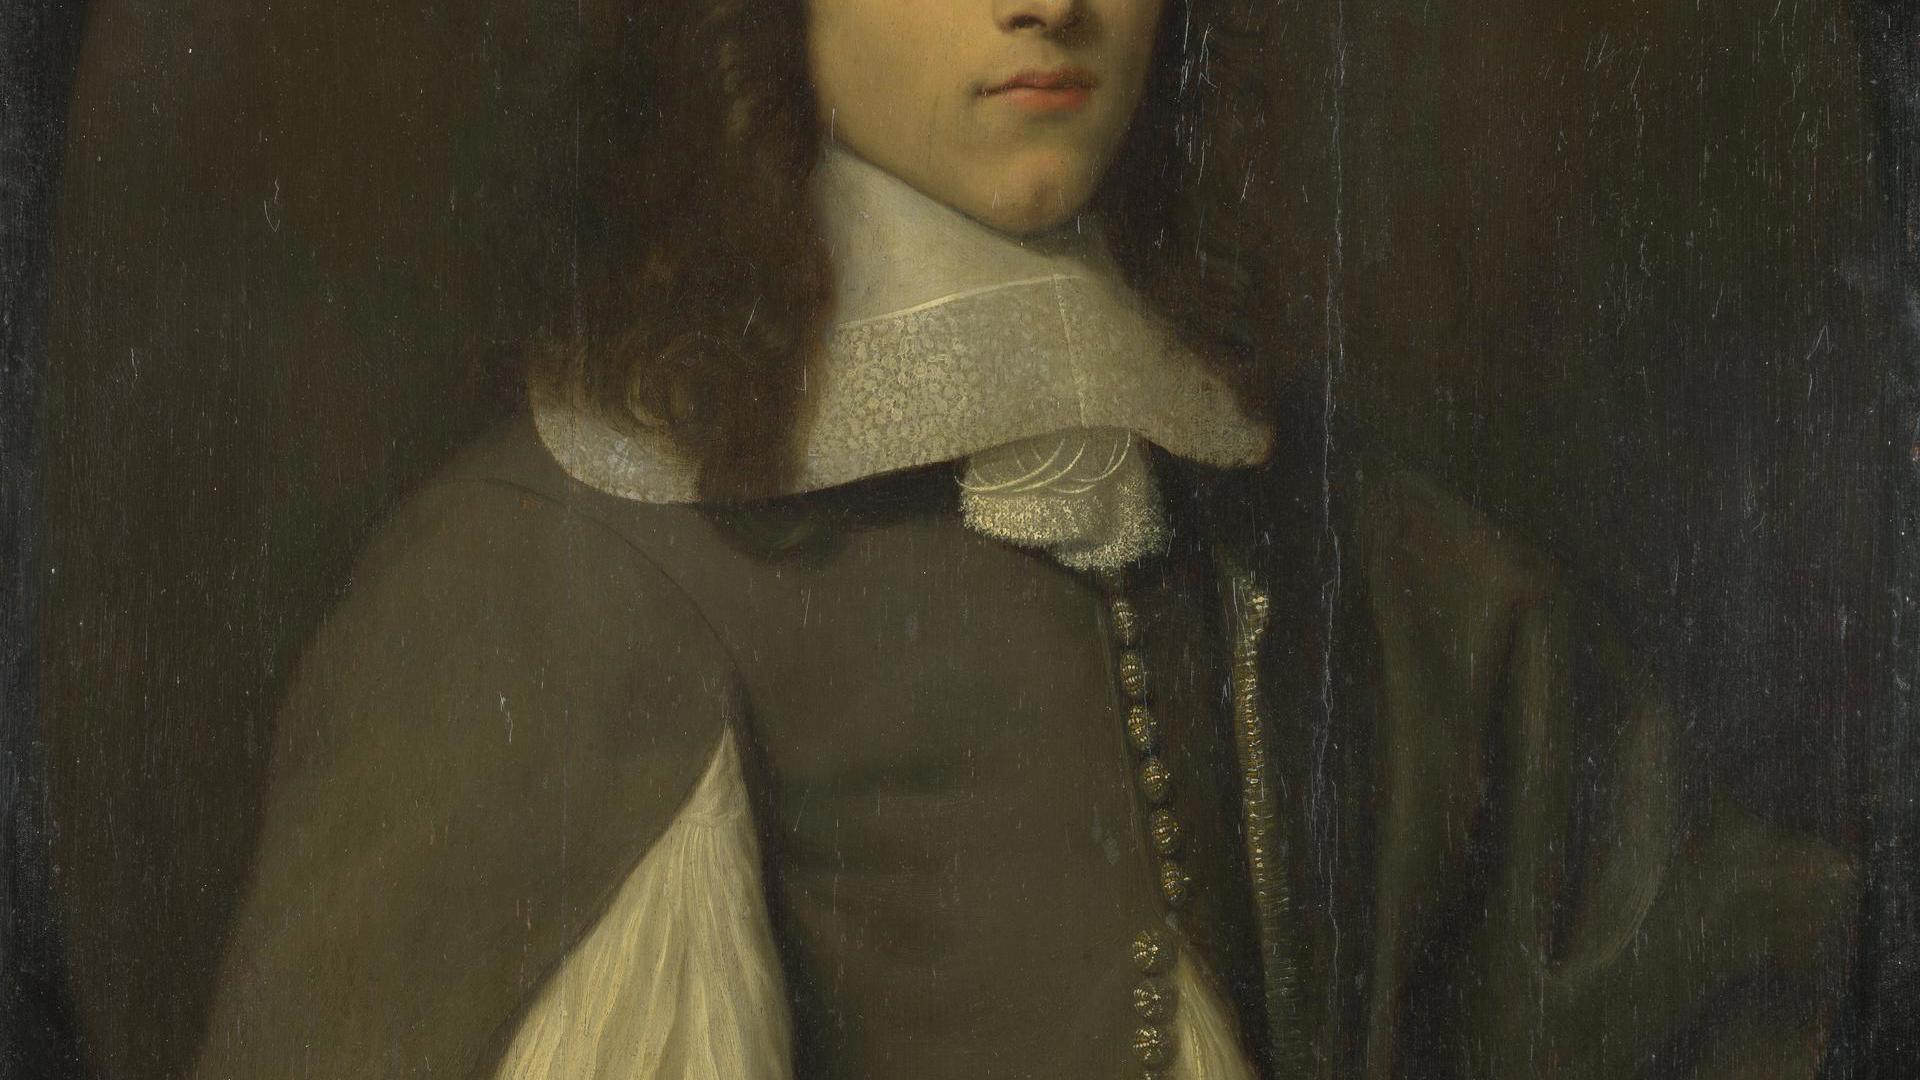 Portrait of a Young Man in Grey by Abraham Raguineau